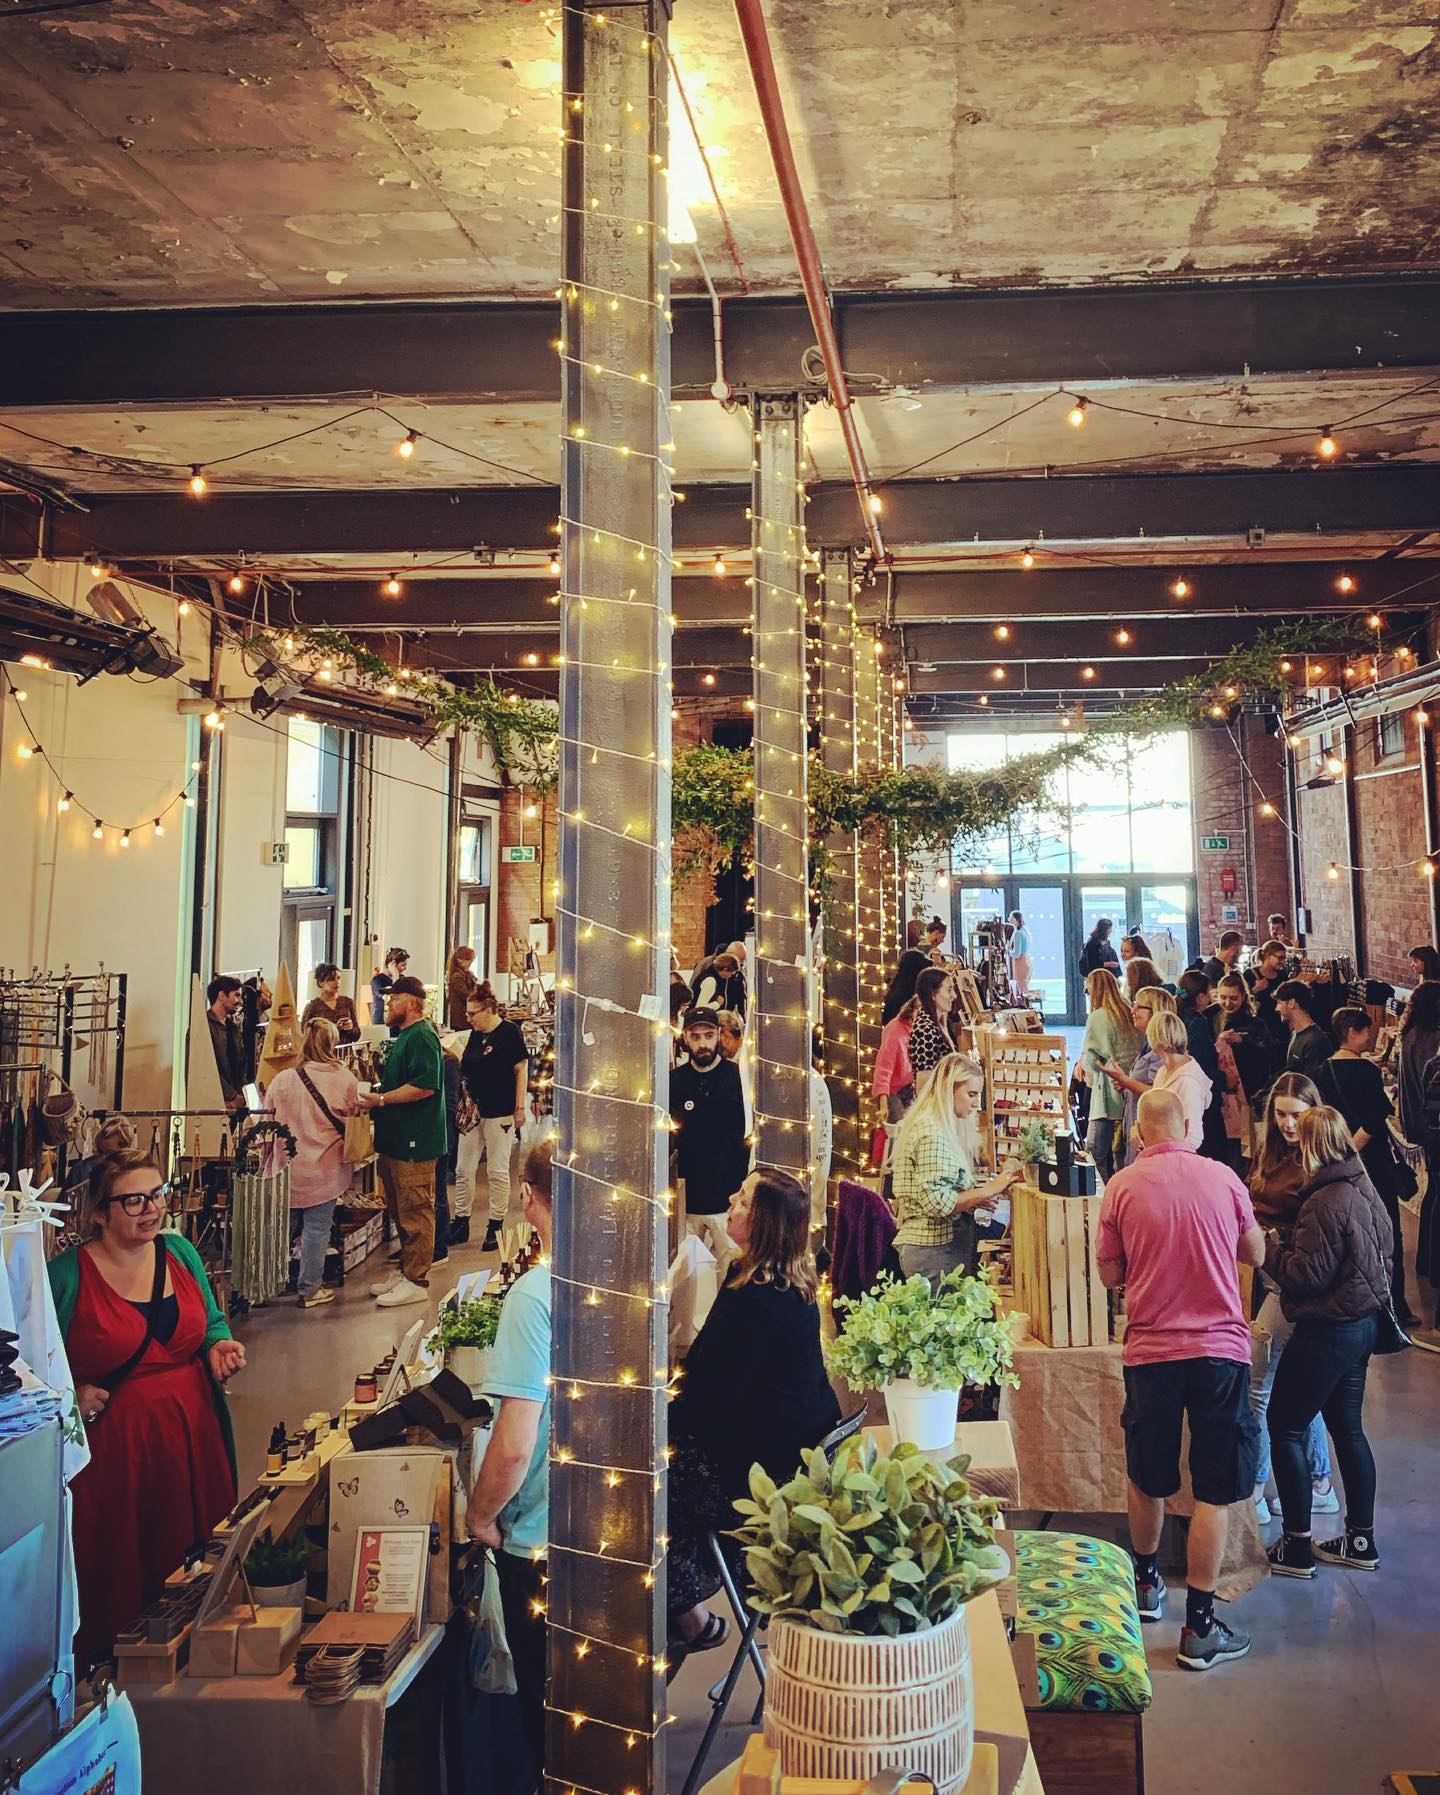 Working towards Sundays @thecraftandflea @paintworks_bristol We love this event! The location is fantastic with a beautiful industrial venue and fab cafe attached serving food and drink all day. Ticket entry-£2.50Hope to see some of you there!